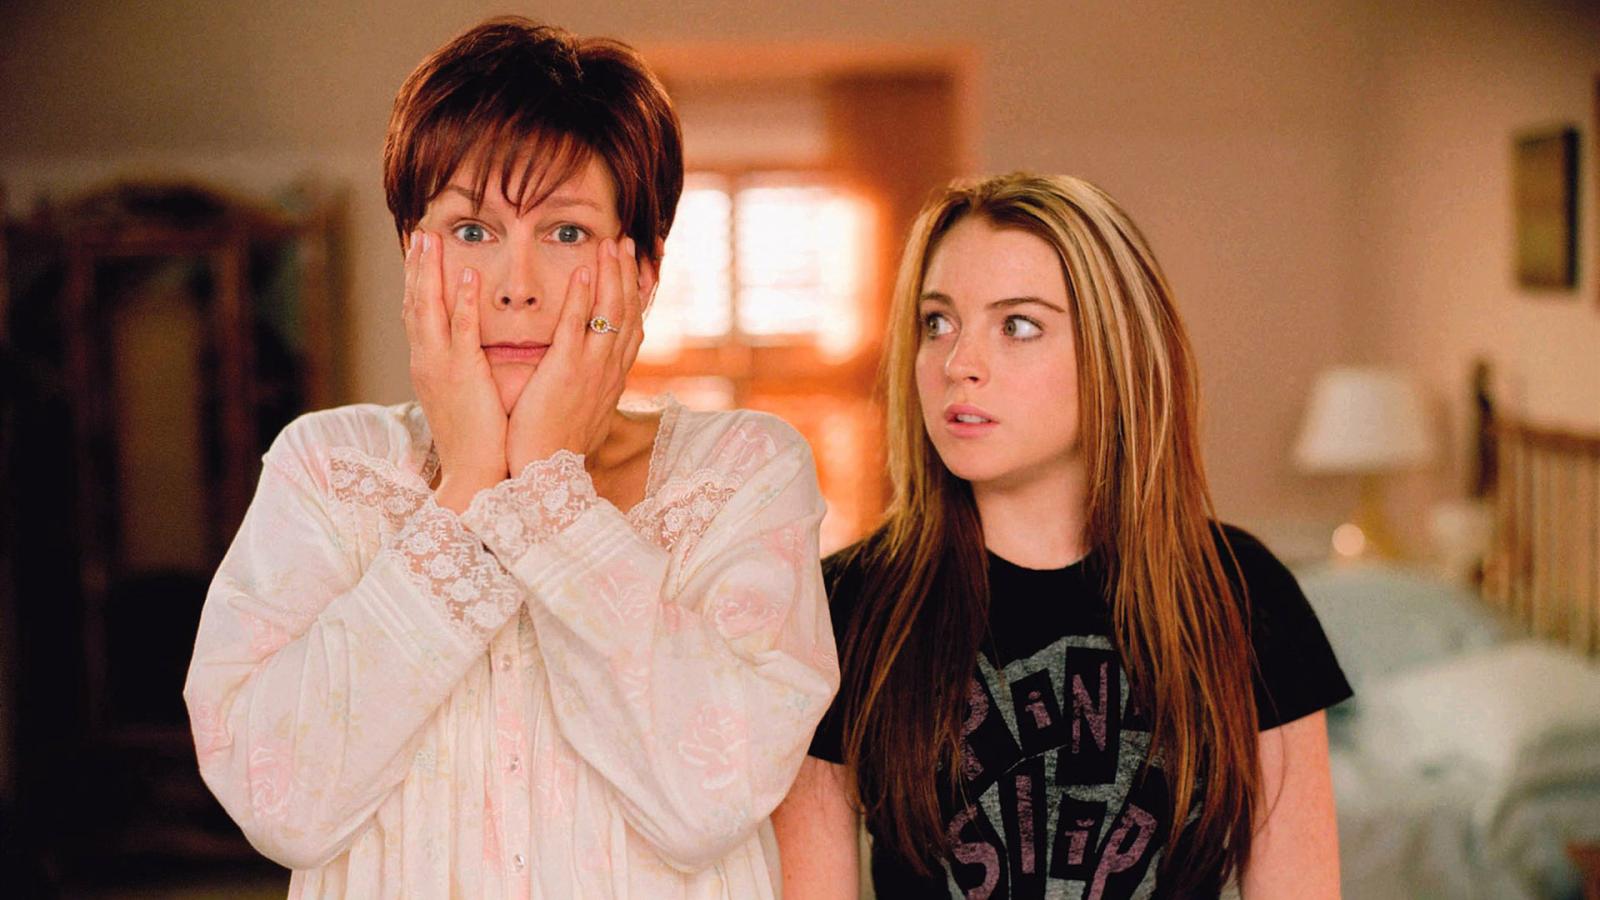 15 Best Movies To Watch if You Like The Parent Trap, Ranked - image 1